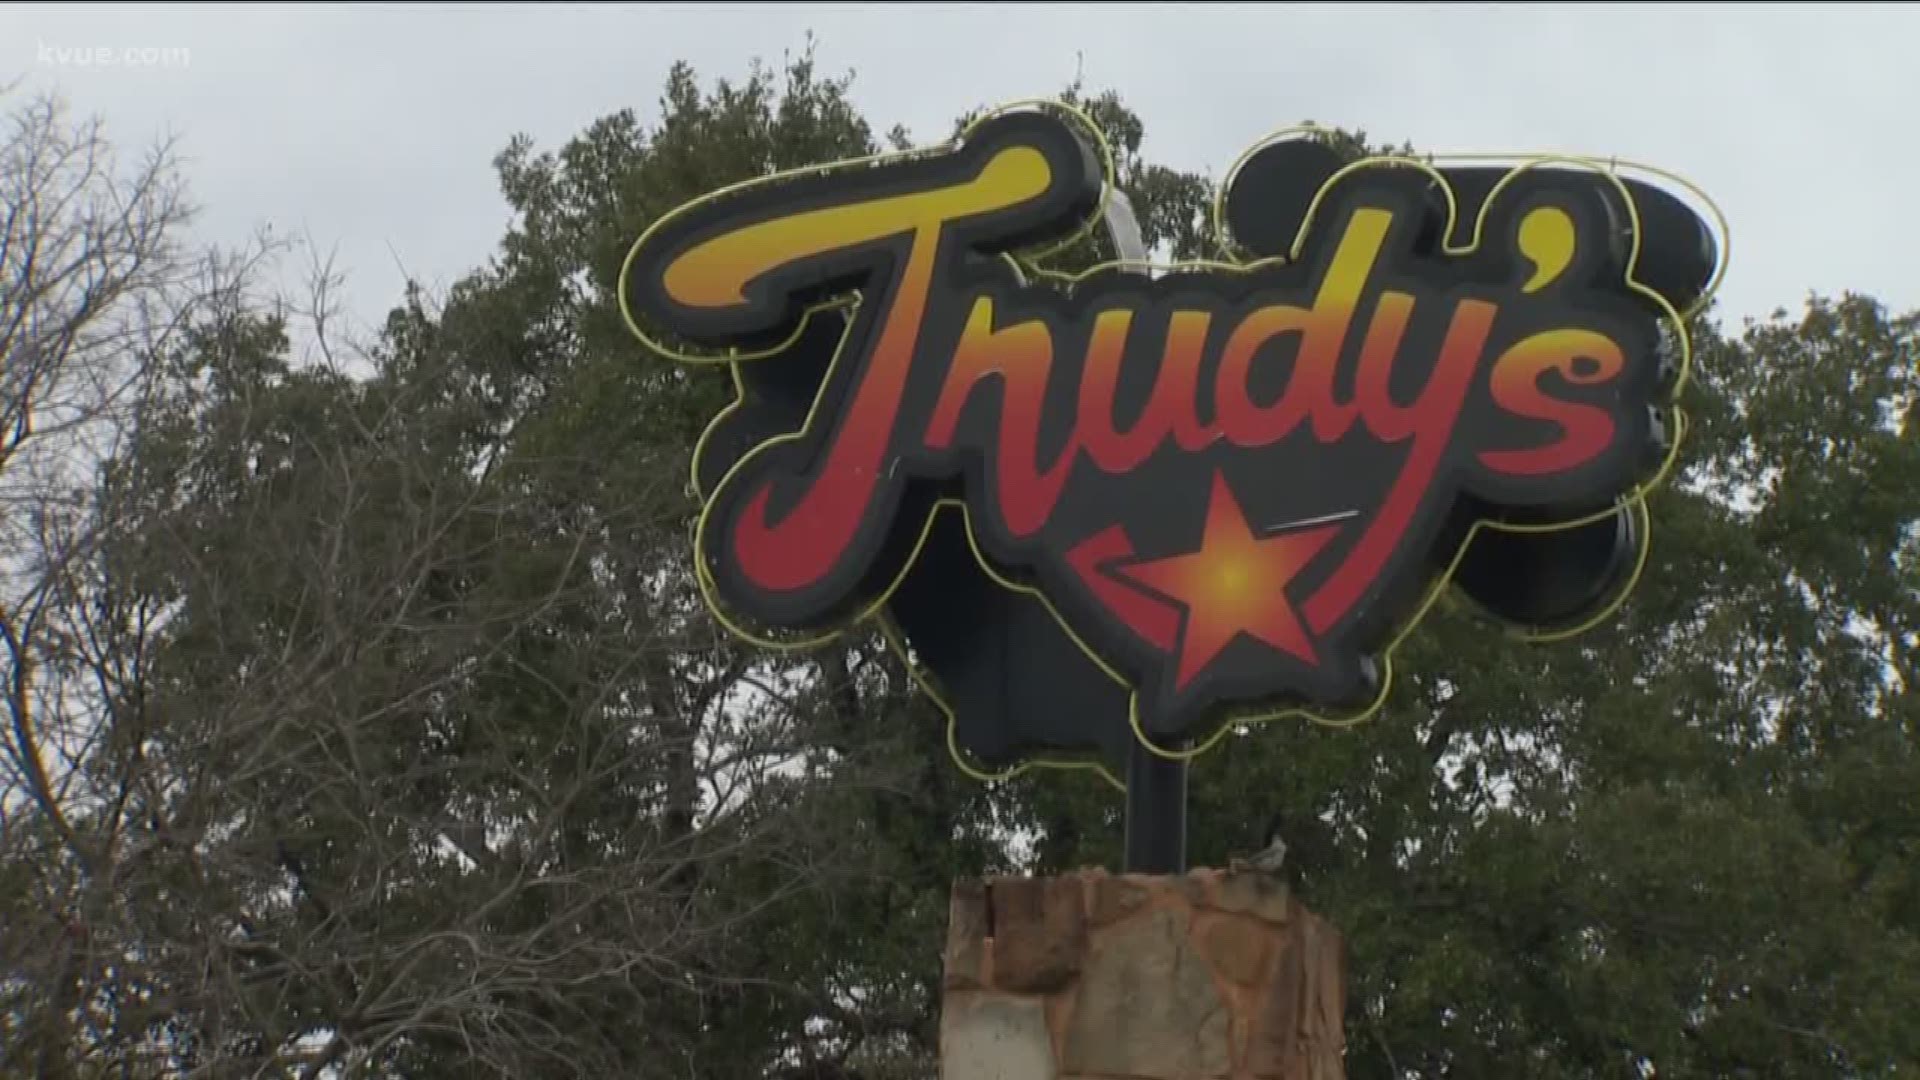 More than 200 employees are finally getting back pay after Trudy's Tex-Mex Restaurant and Bar received an emergency loan.